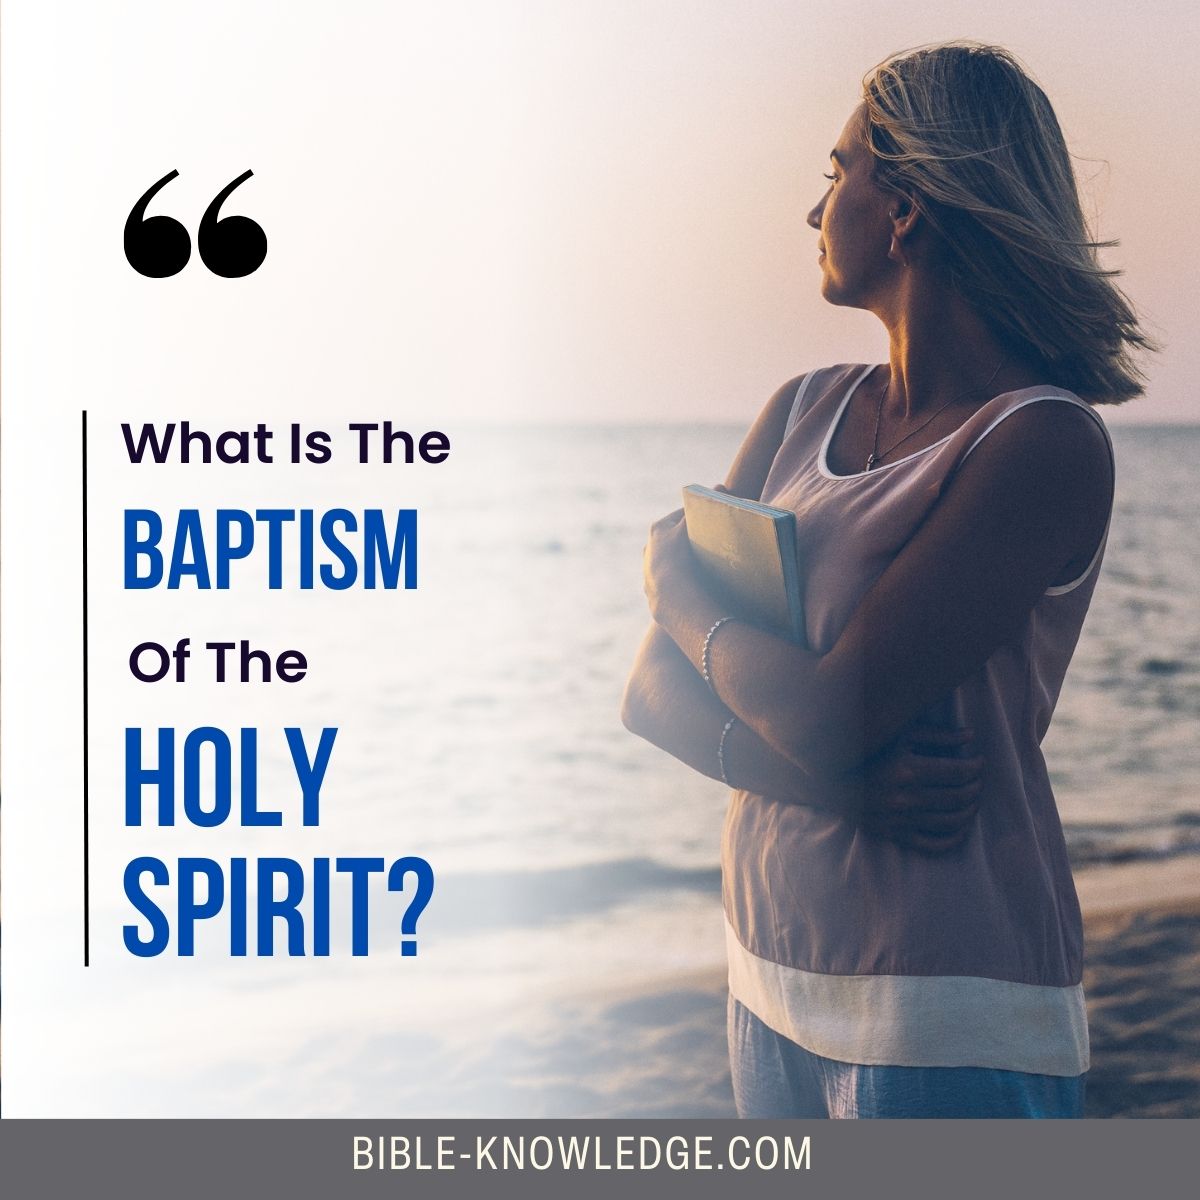 What Is The Baptism Of The Holy Spirit